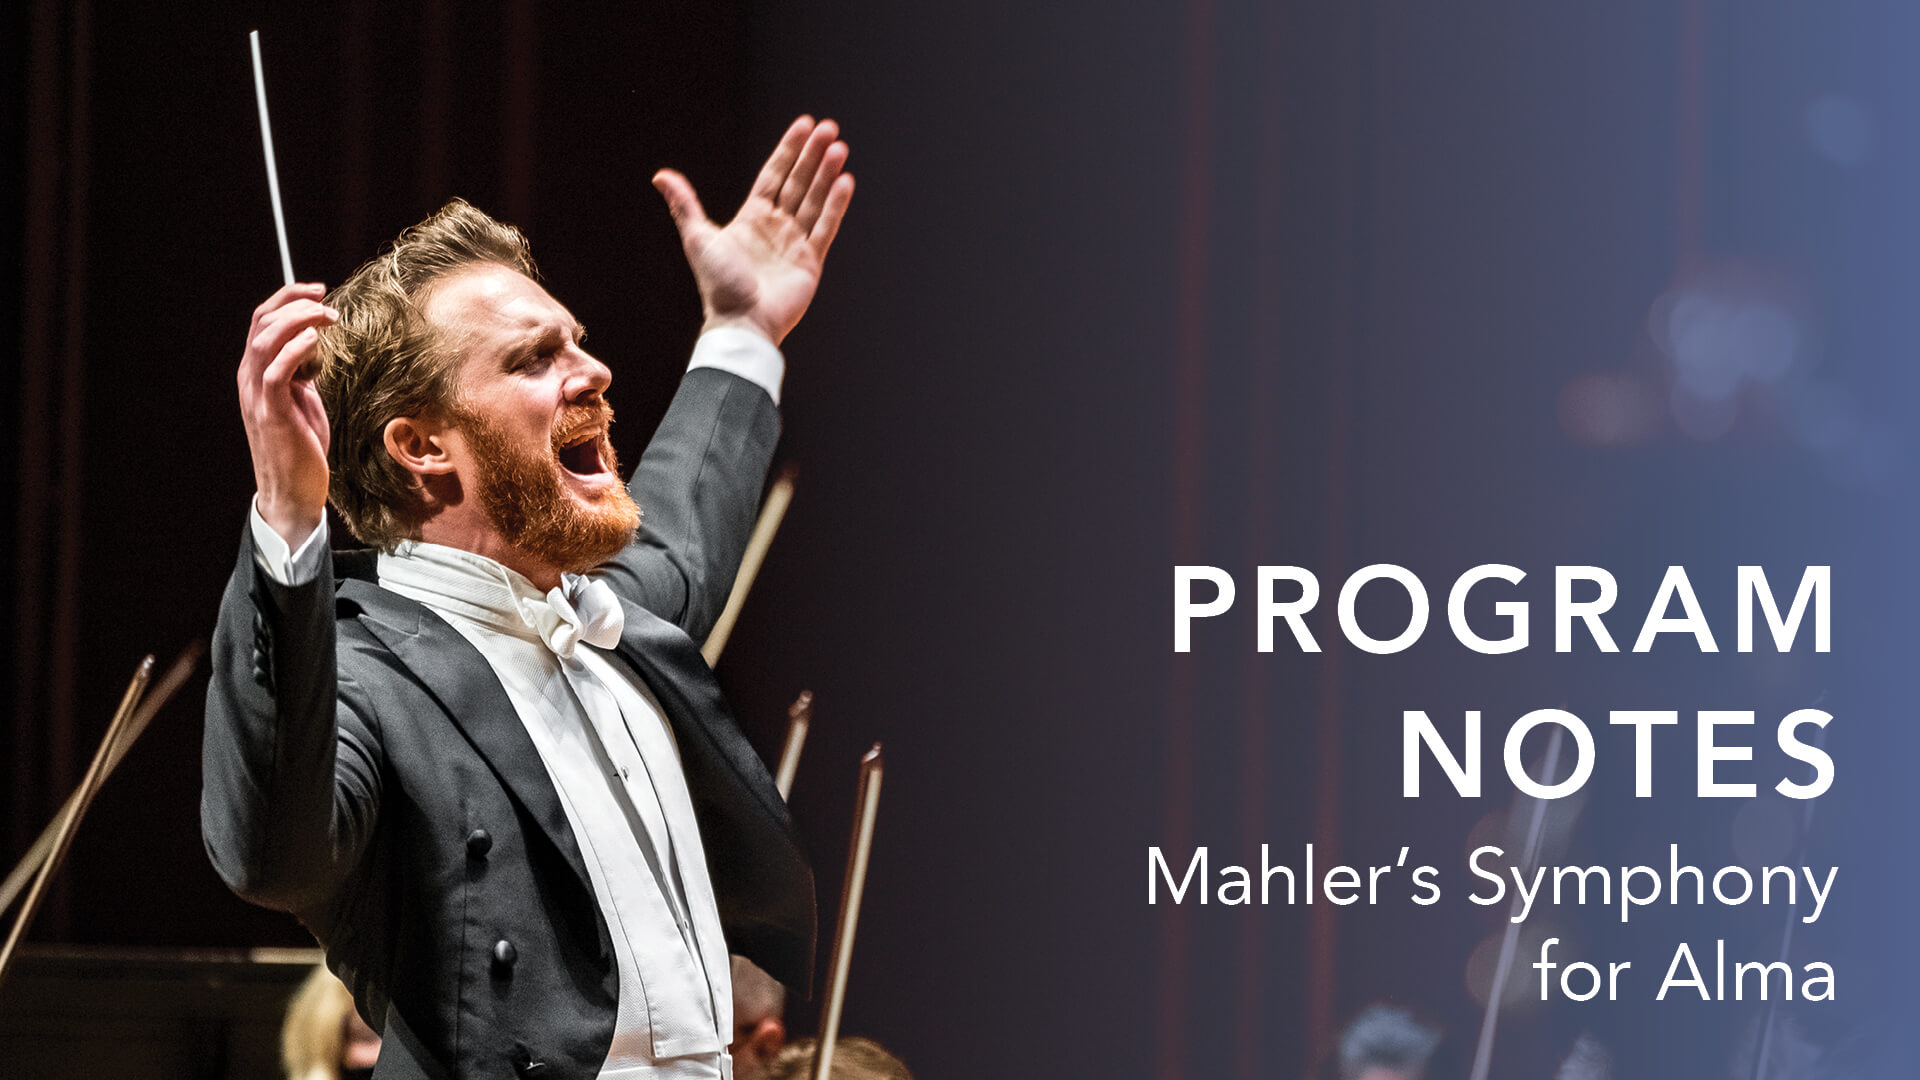 Featured image for “Program Notes: Mahler’s Symphony for Alma”